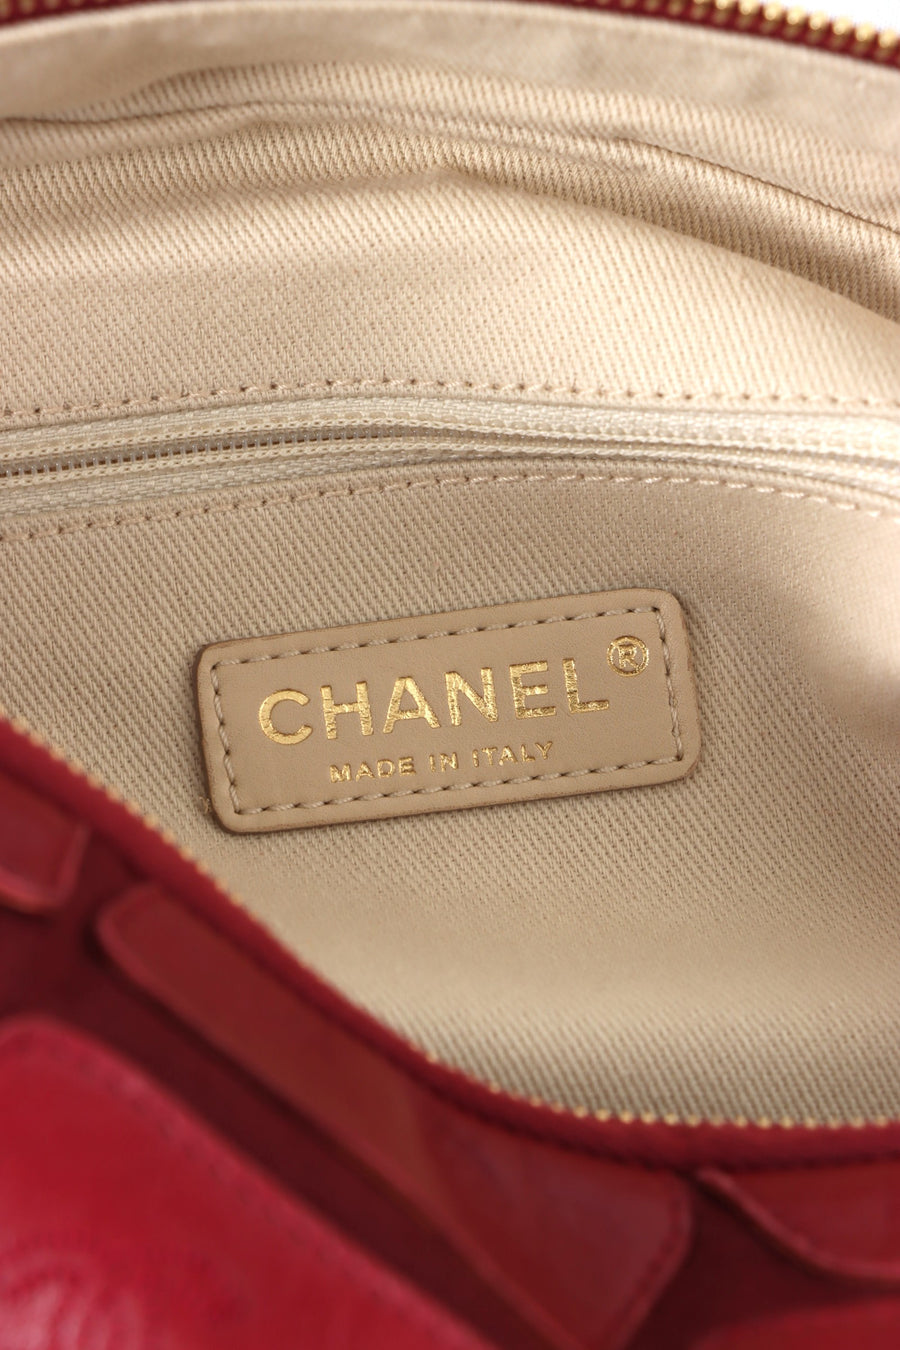 CHANEL 'Scales' Red Leather Camera Bag Italy Made